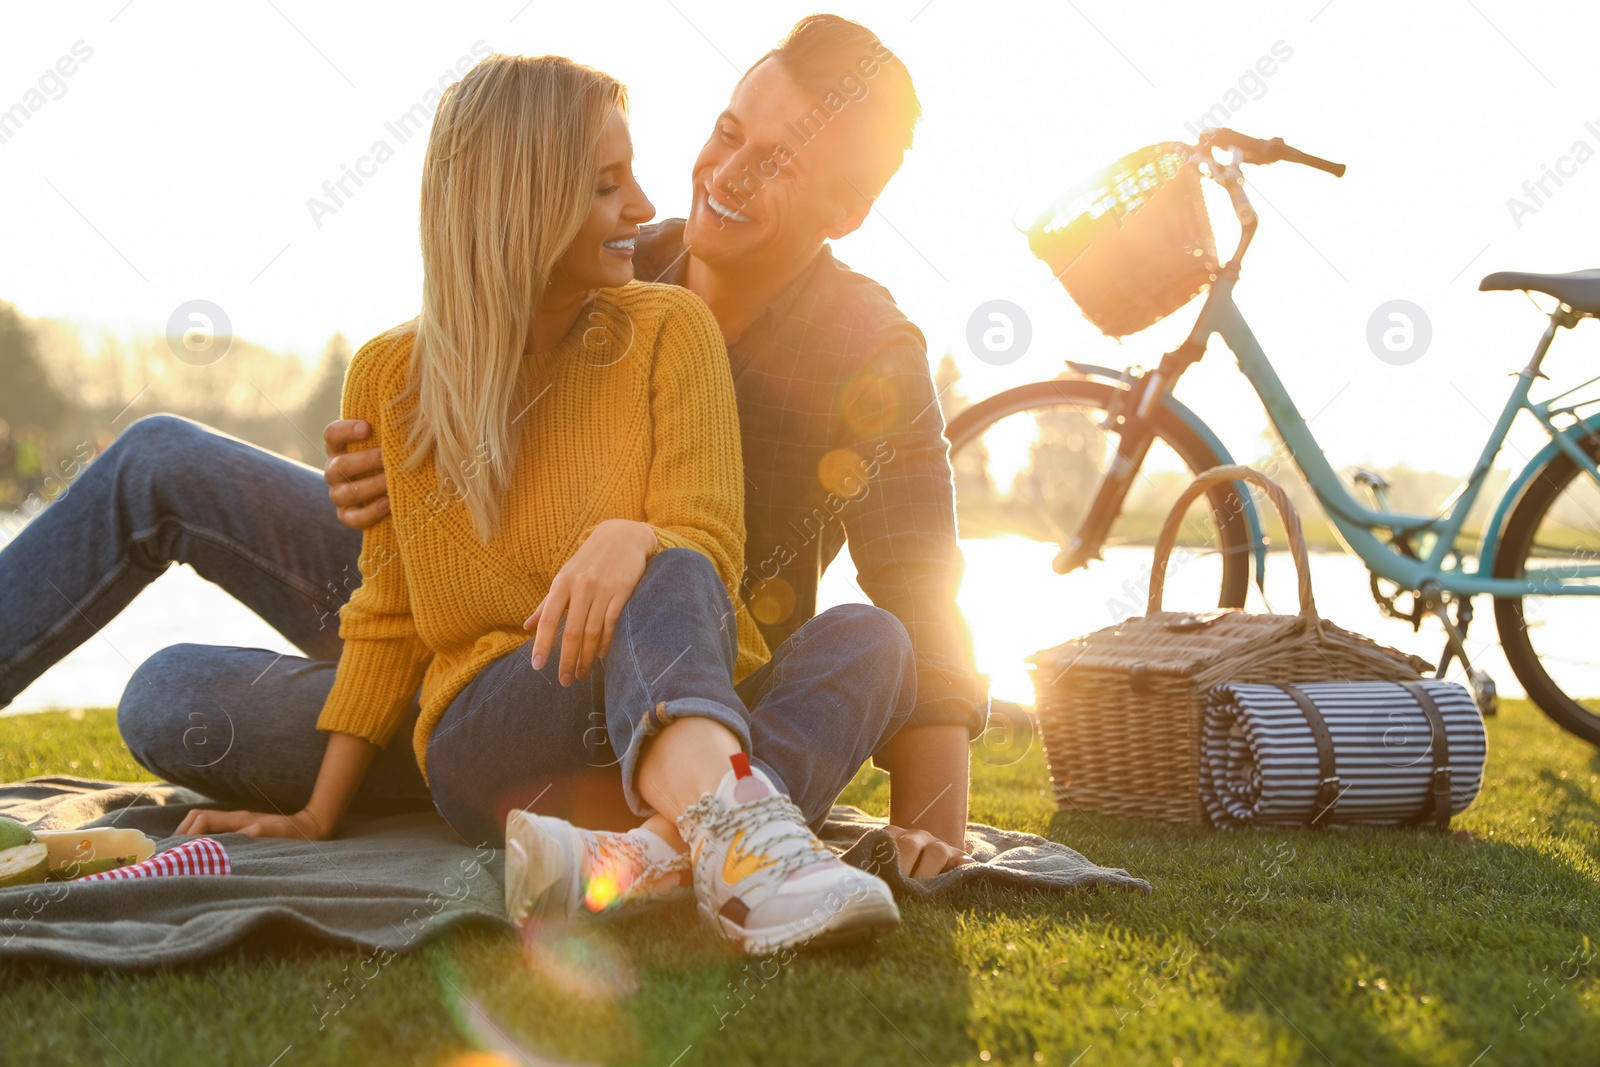 Photo of Happy young couple having picnic near lake on sunny day